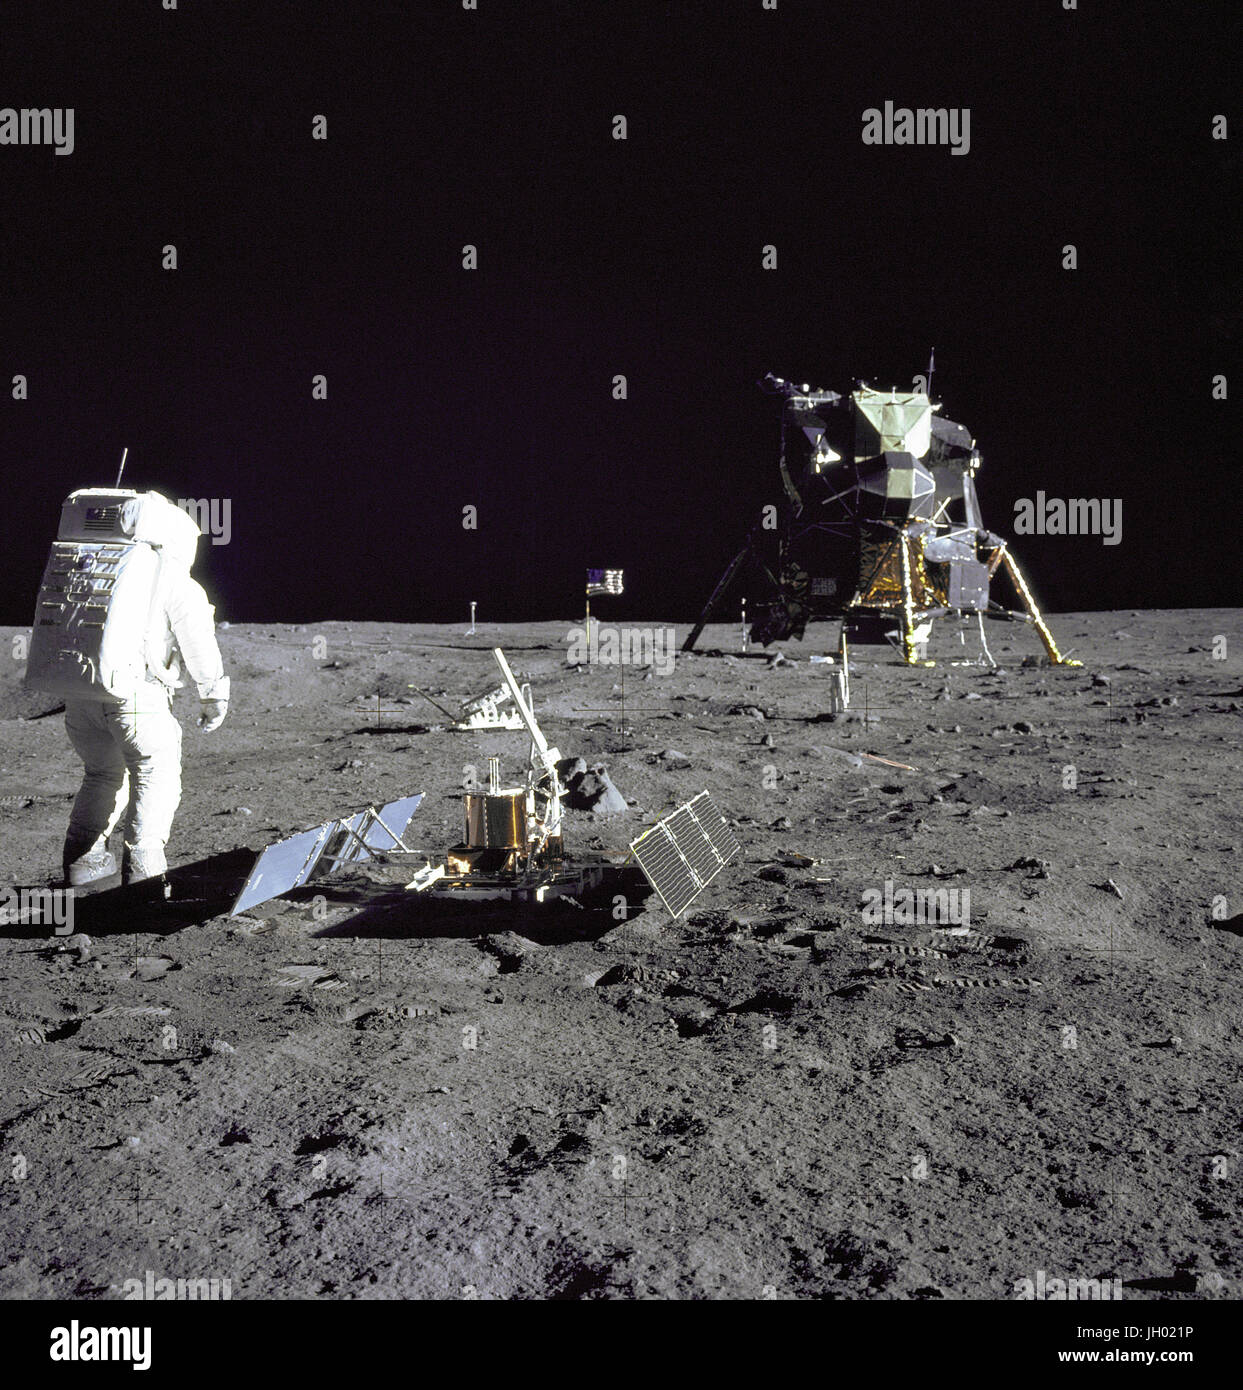 Aldrin Looks Back at Tranquility Base. Astronaut Edwin E.'Buzz' Aldrin Jr., Lunar Module pilot, is photographed during the Apollo 11 extravehicular activity on the Moon. He has just deployed the Early Apollo Scientific Experiments Package (EASEP). In the foreground is the Passive Seismic Experiment Package (PSEP); beyond it is the Laser Ranging Retro-Reflector (LR-3); in the center background is the United States flag; in the left background is the black and white lunar surface television camera. Stock Photo